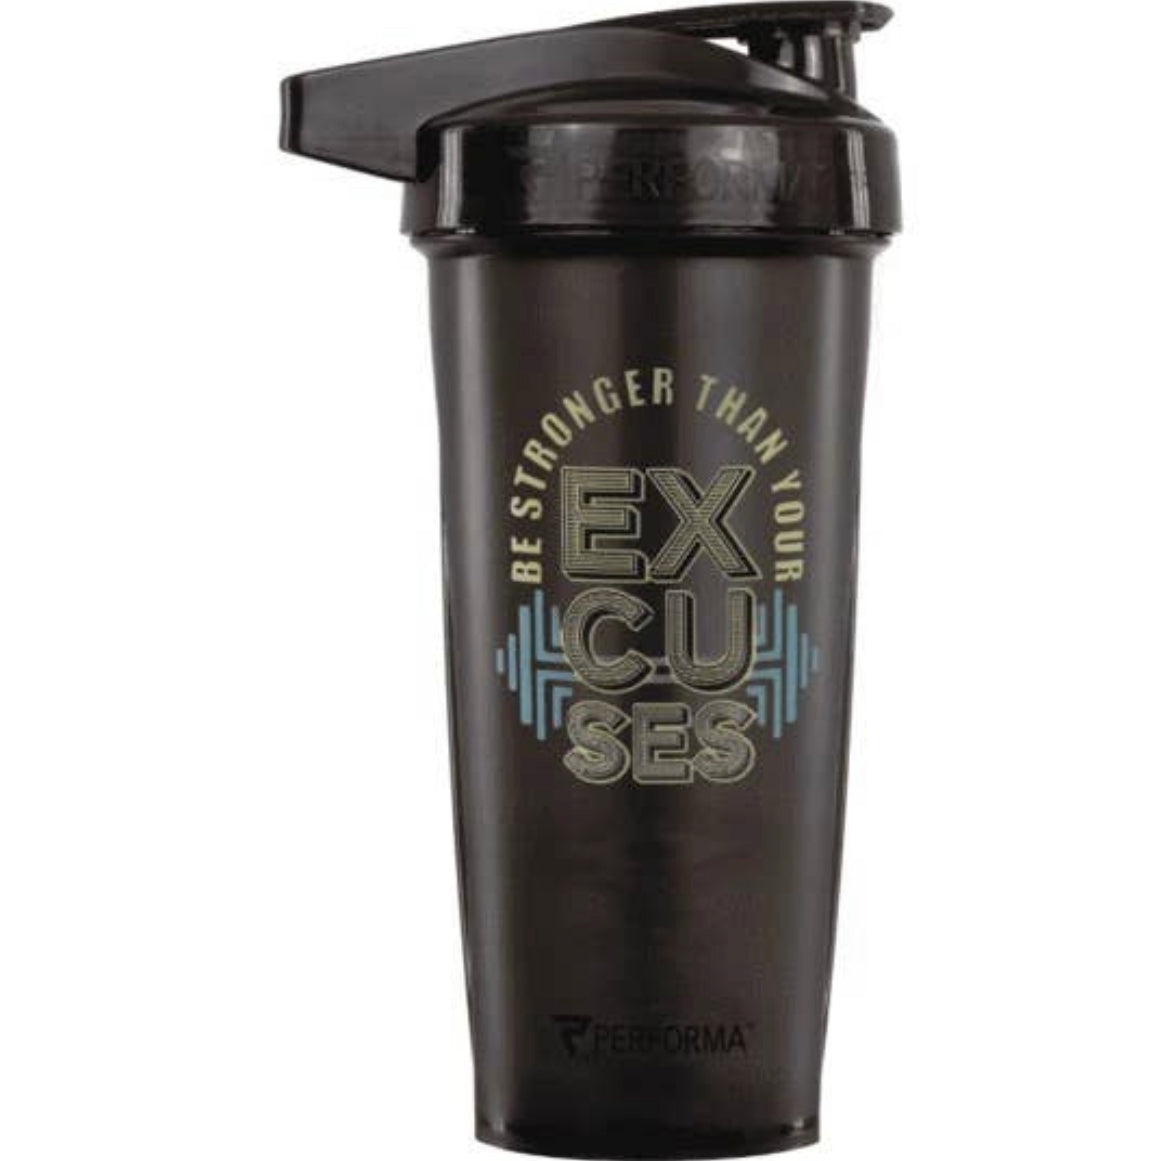 No Excuses Shaker Bottle